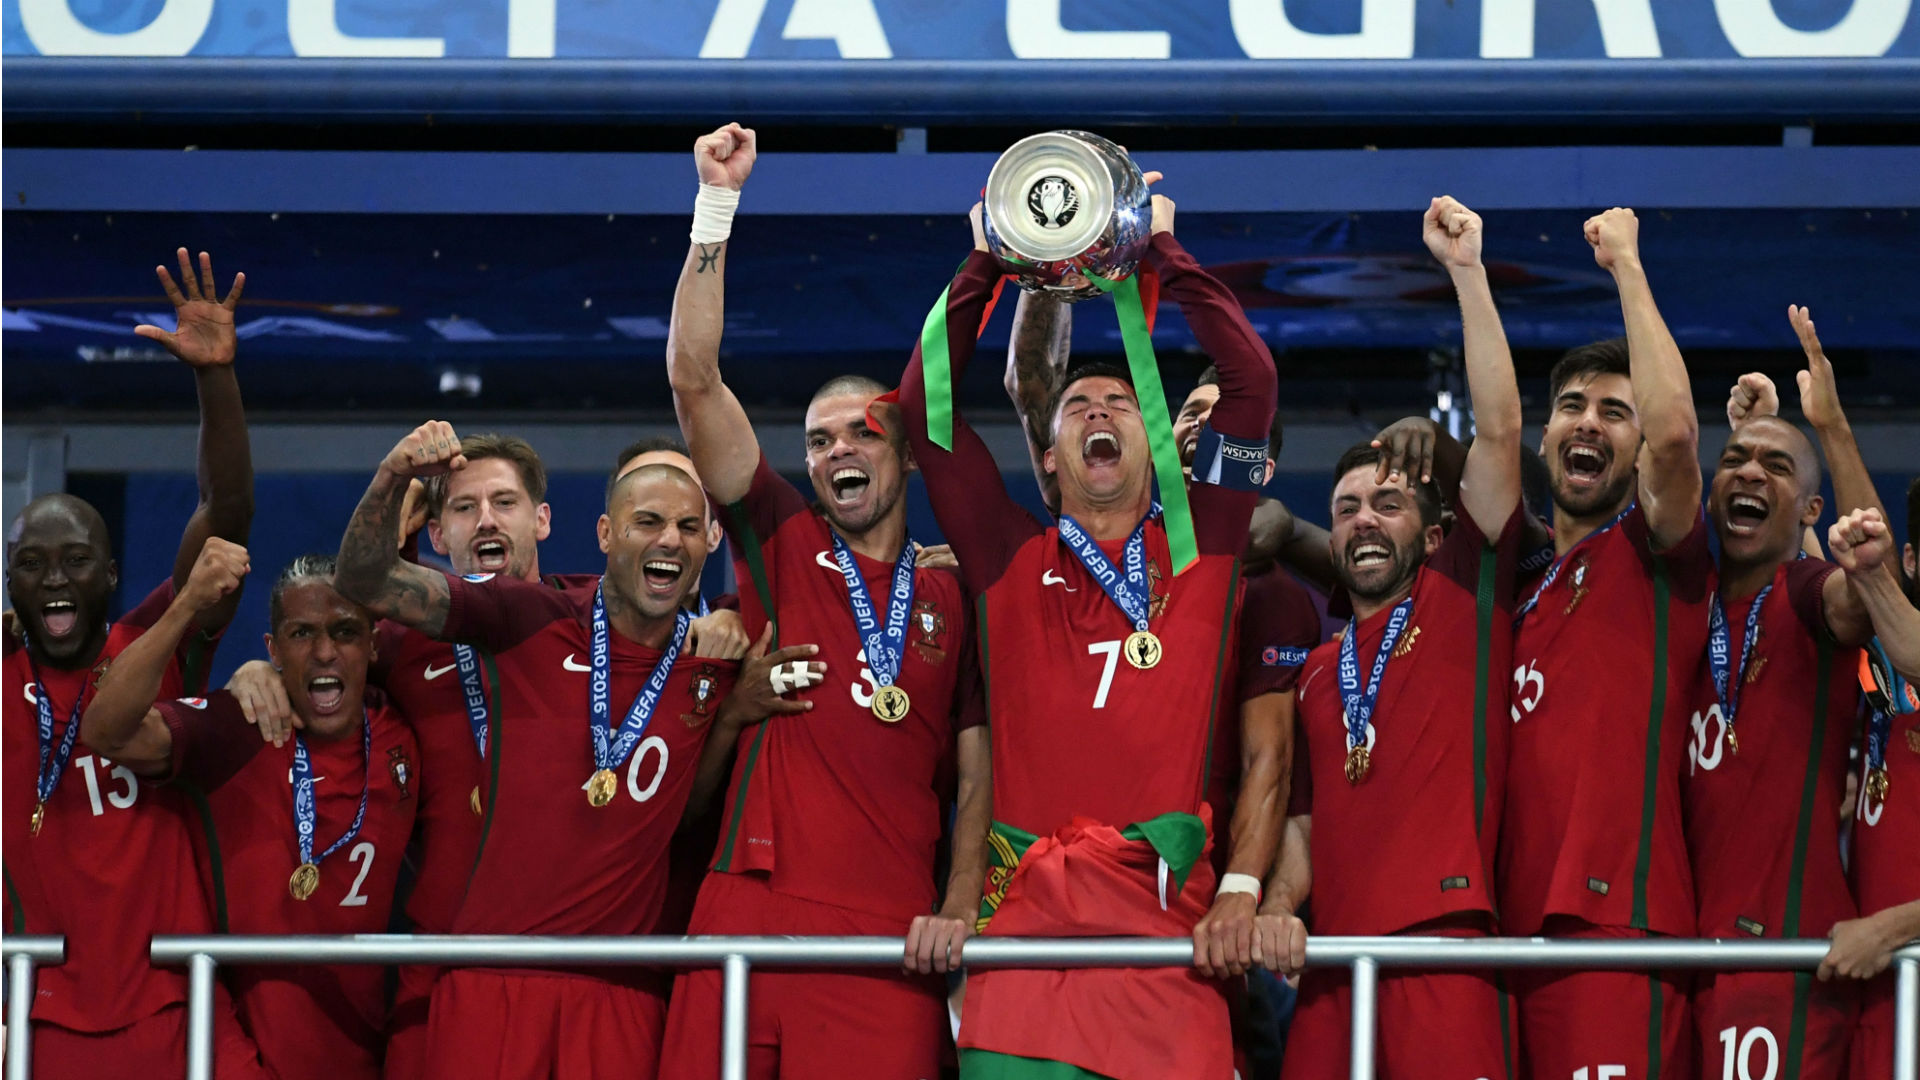 Euro 2016 worth €1.2bn to France